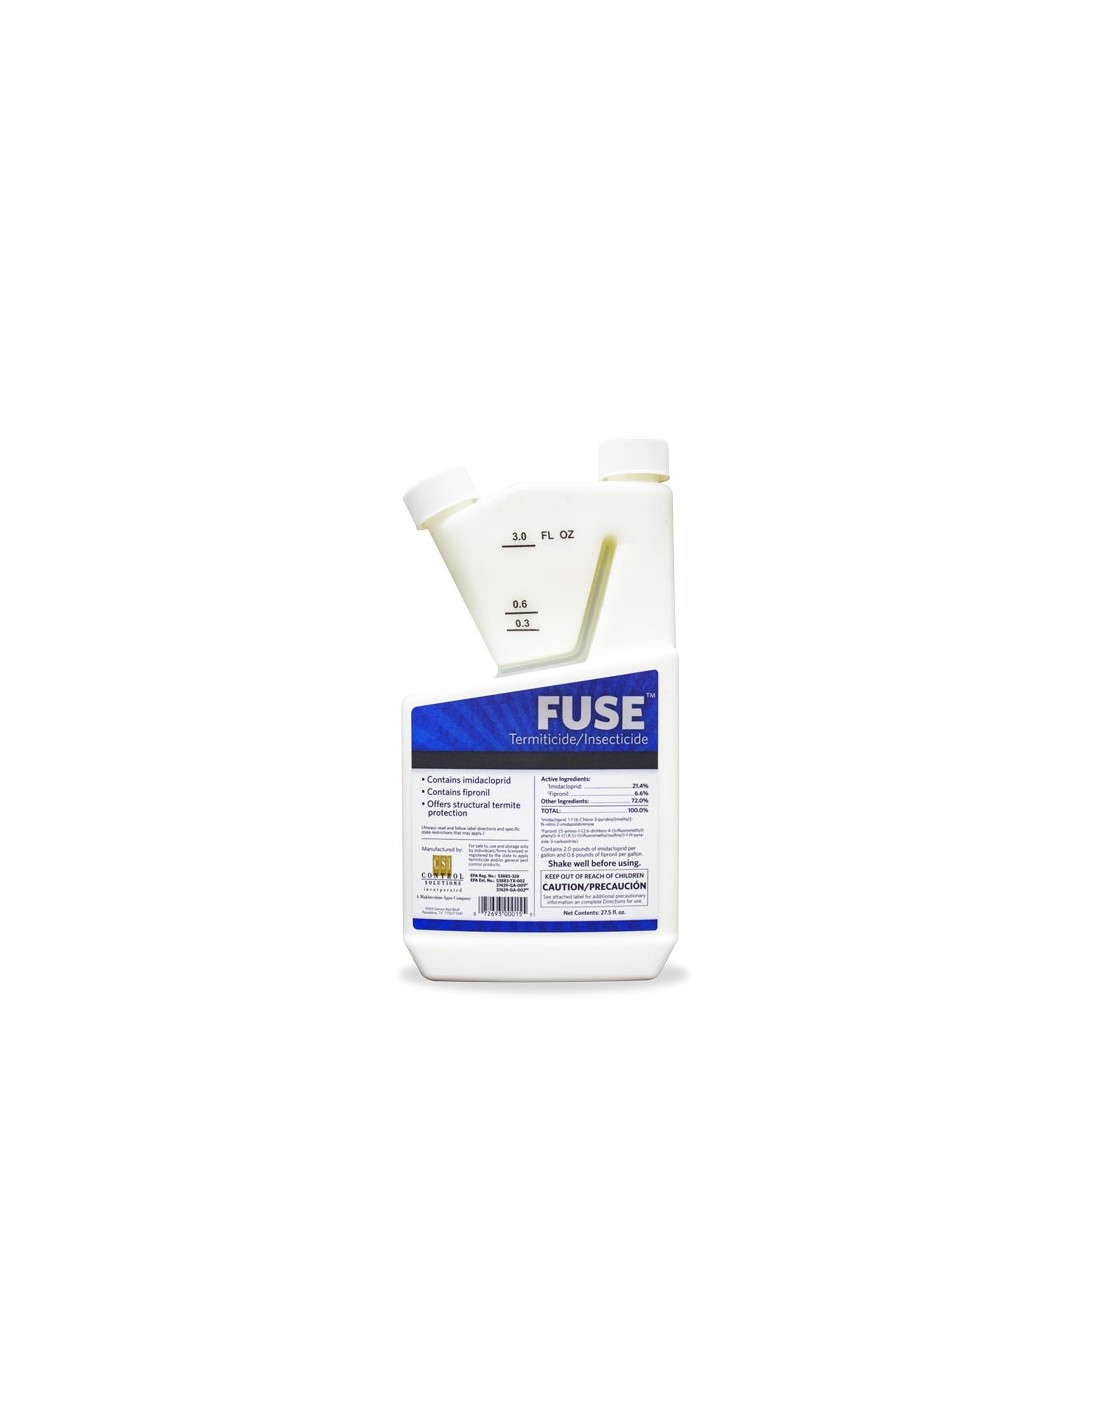 Fuse Termiticide Insecticide Questions & Answers